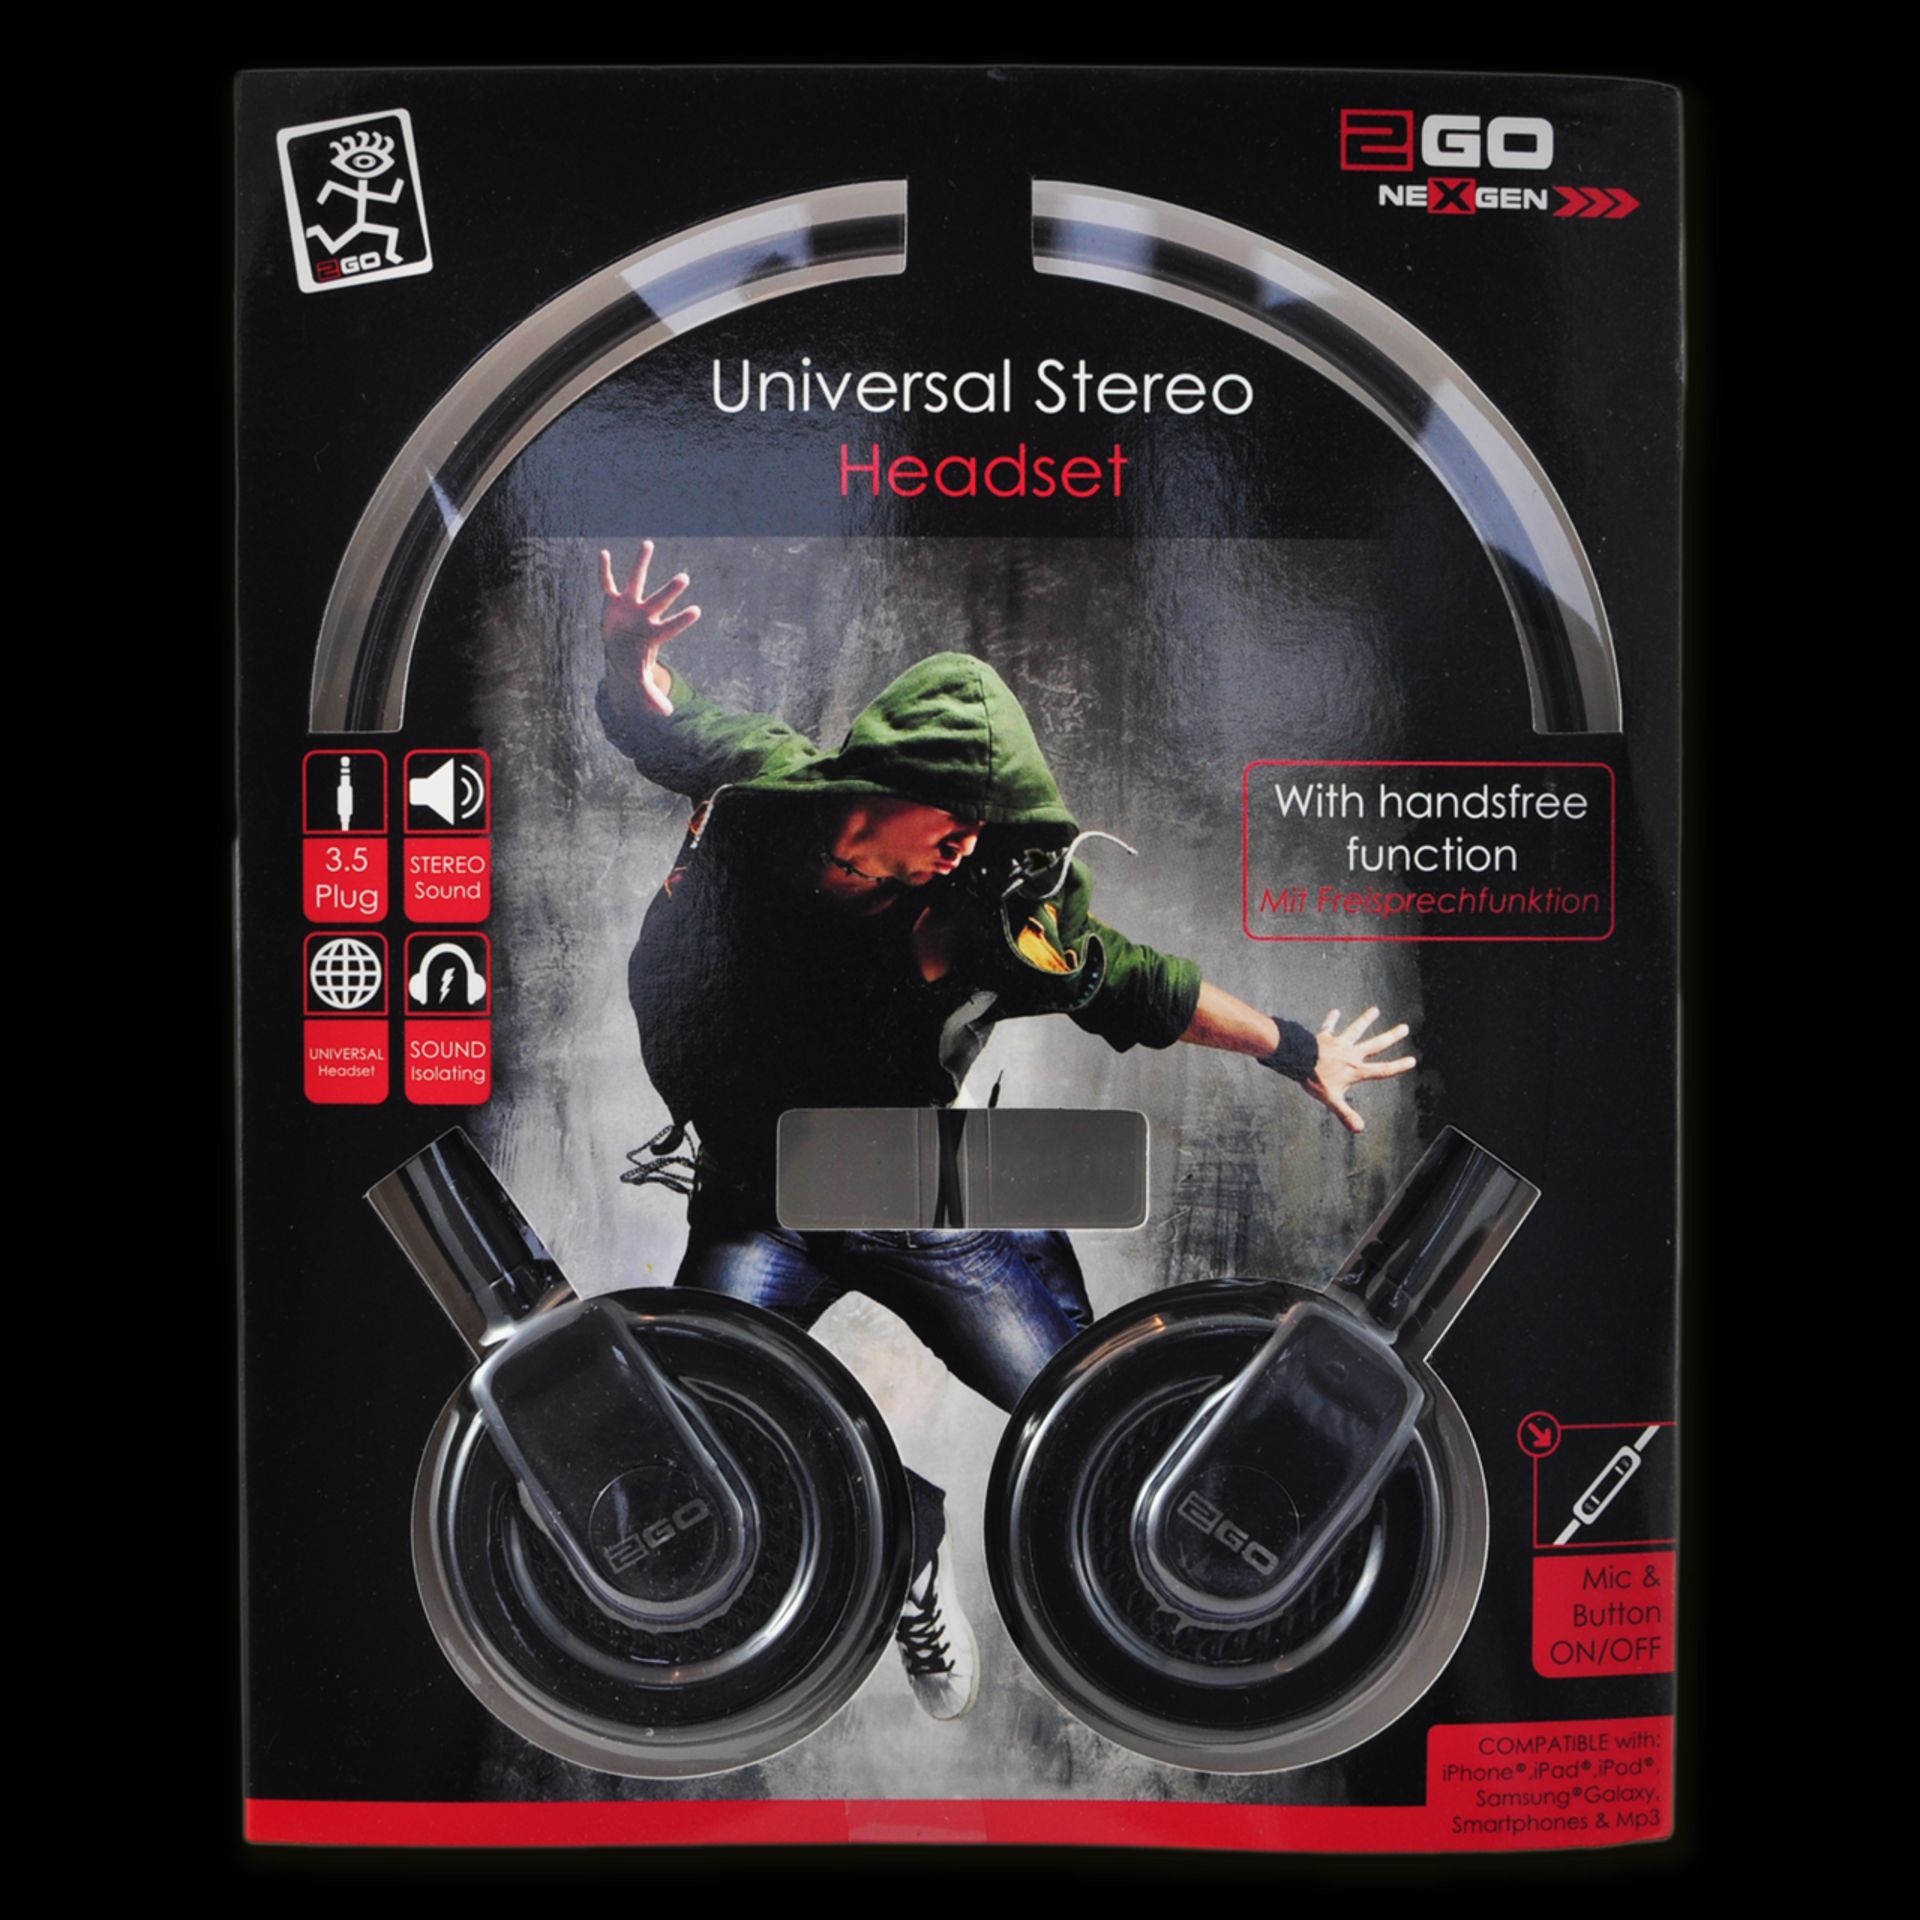 Brand New 2Go Nexgen Universal Stereo Headset With Hands Free Function